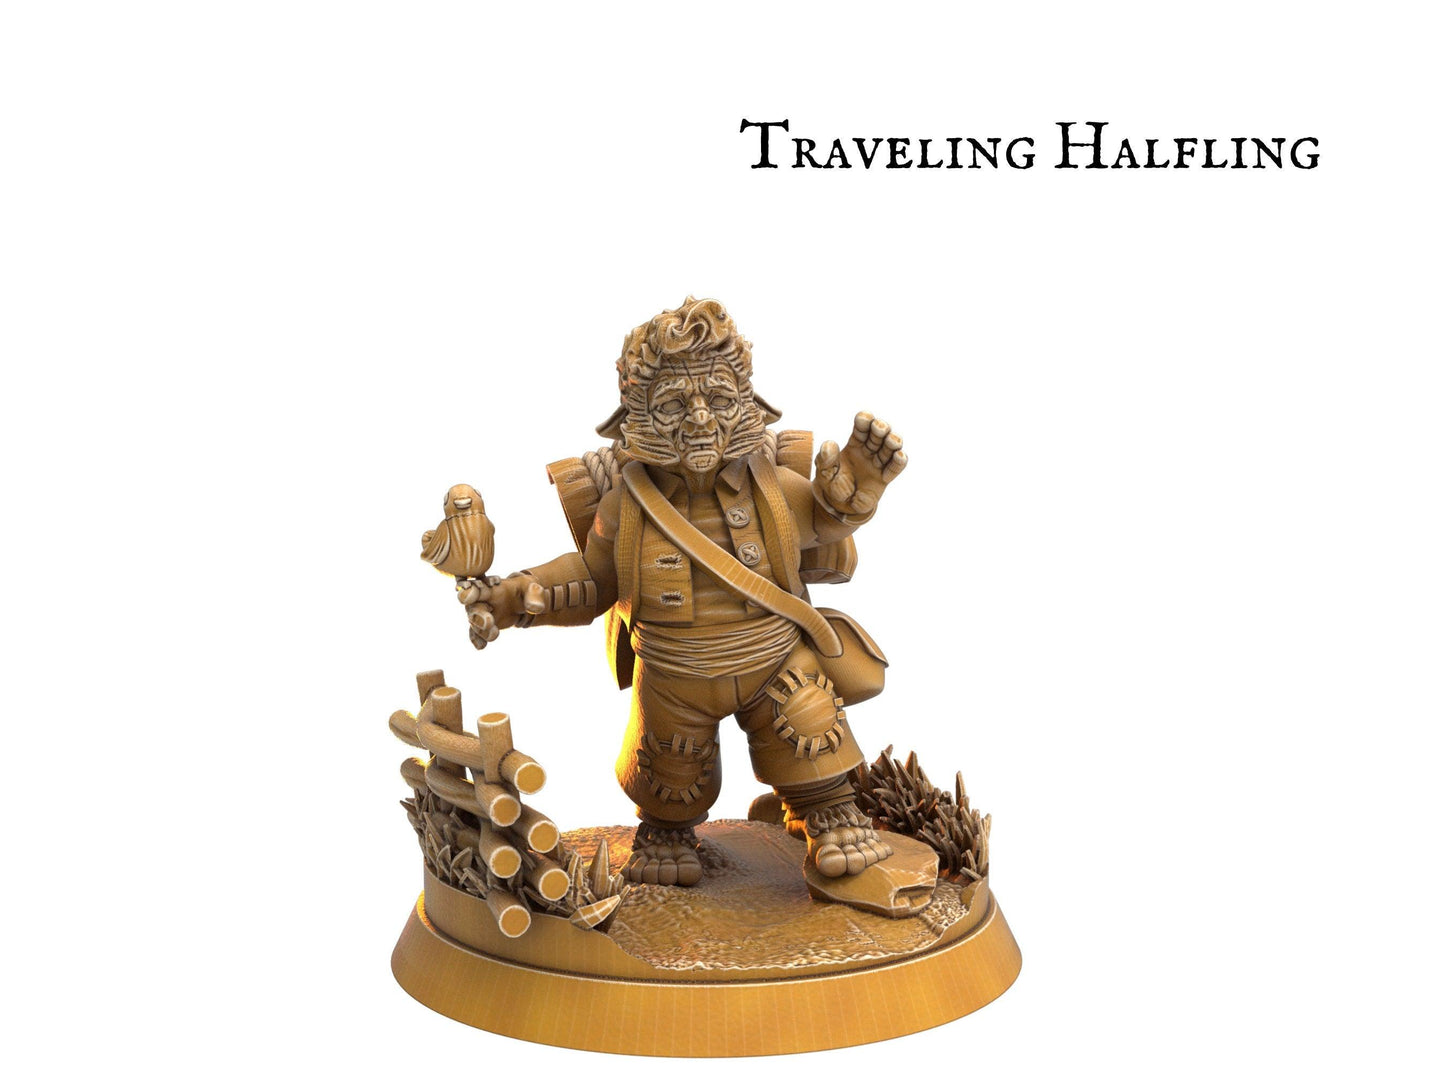 Male Halfling Thief Miniature - 8 Poses - 32mm scale Tabletop gaming DnD Miniature Dungeons and Dragons, male dnd halfling miniature - Plague Miniatures shop for DnD Miniatures